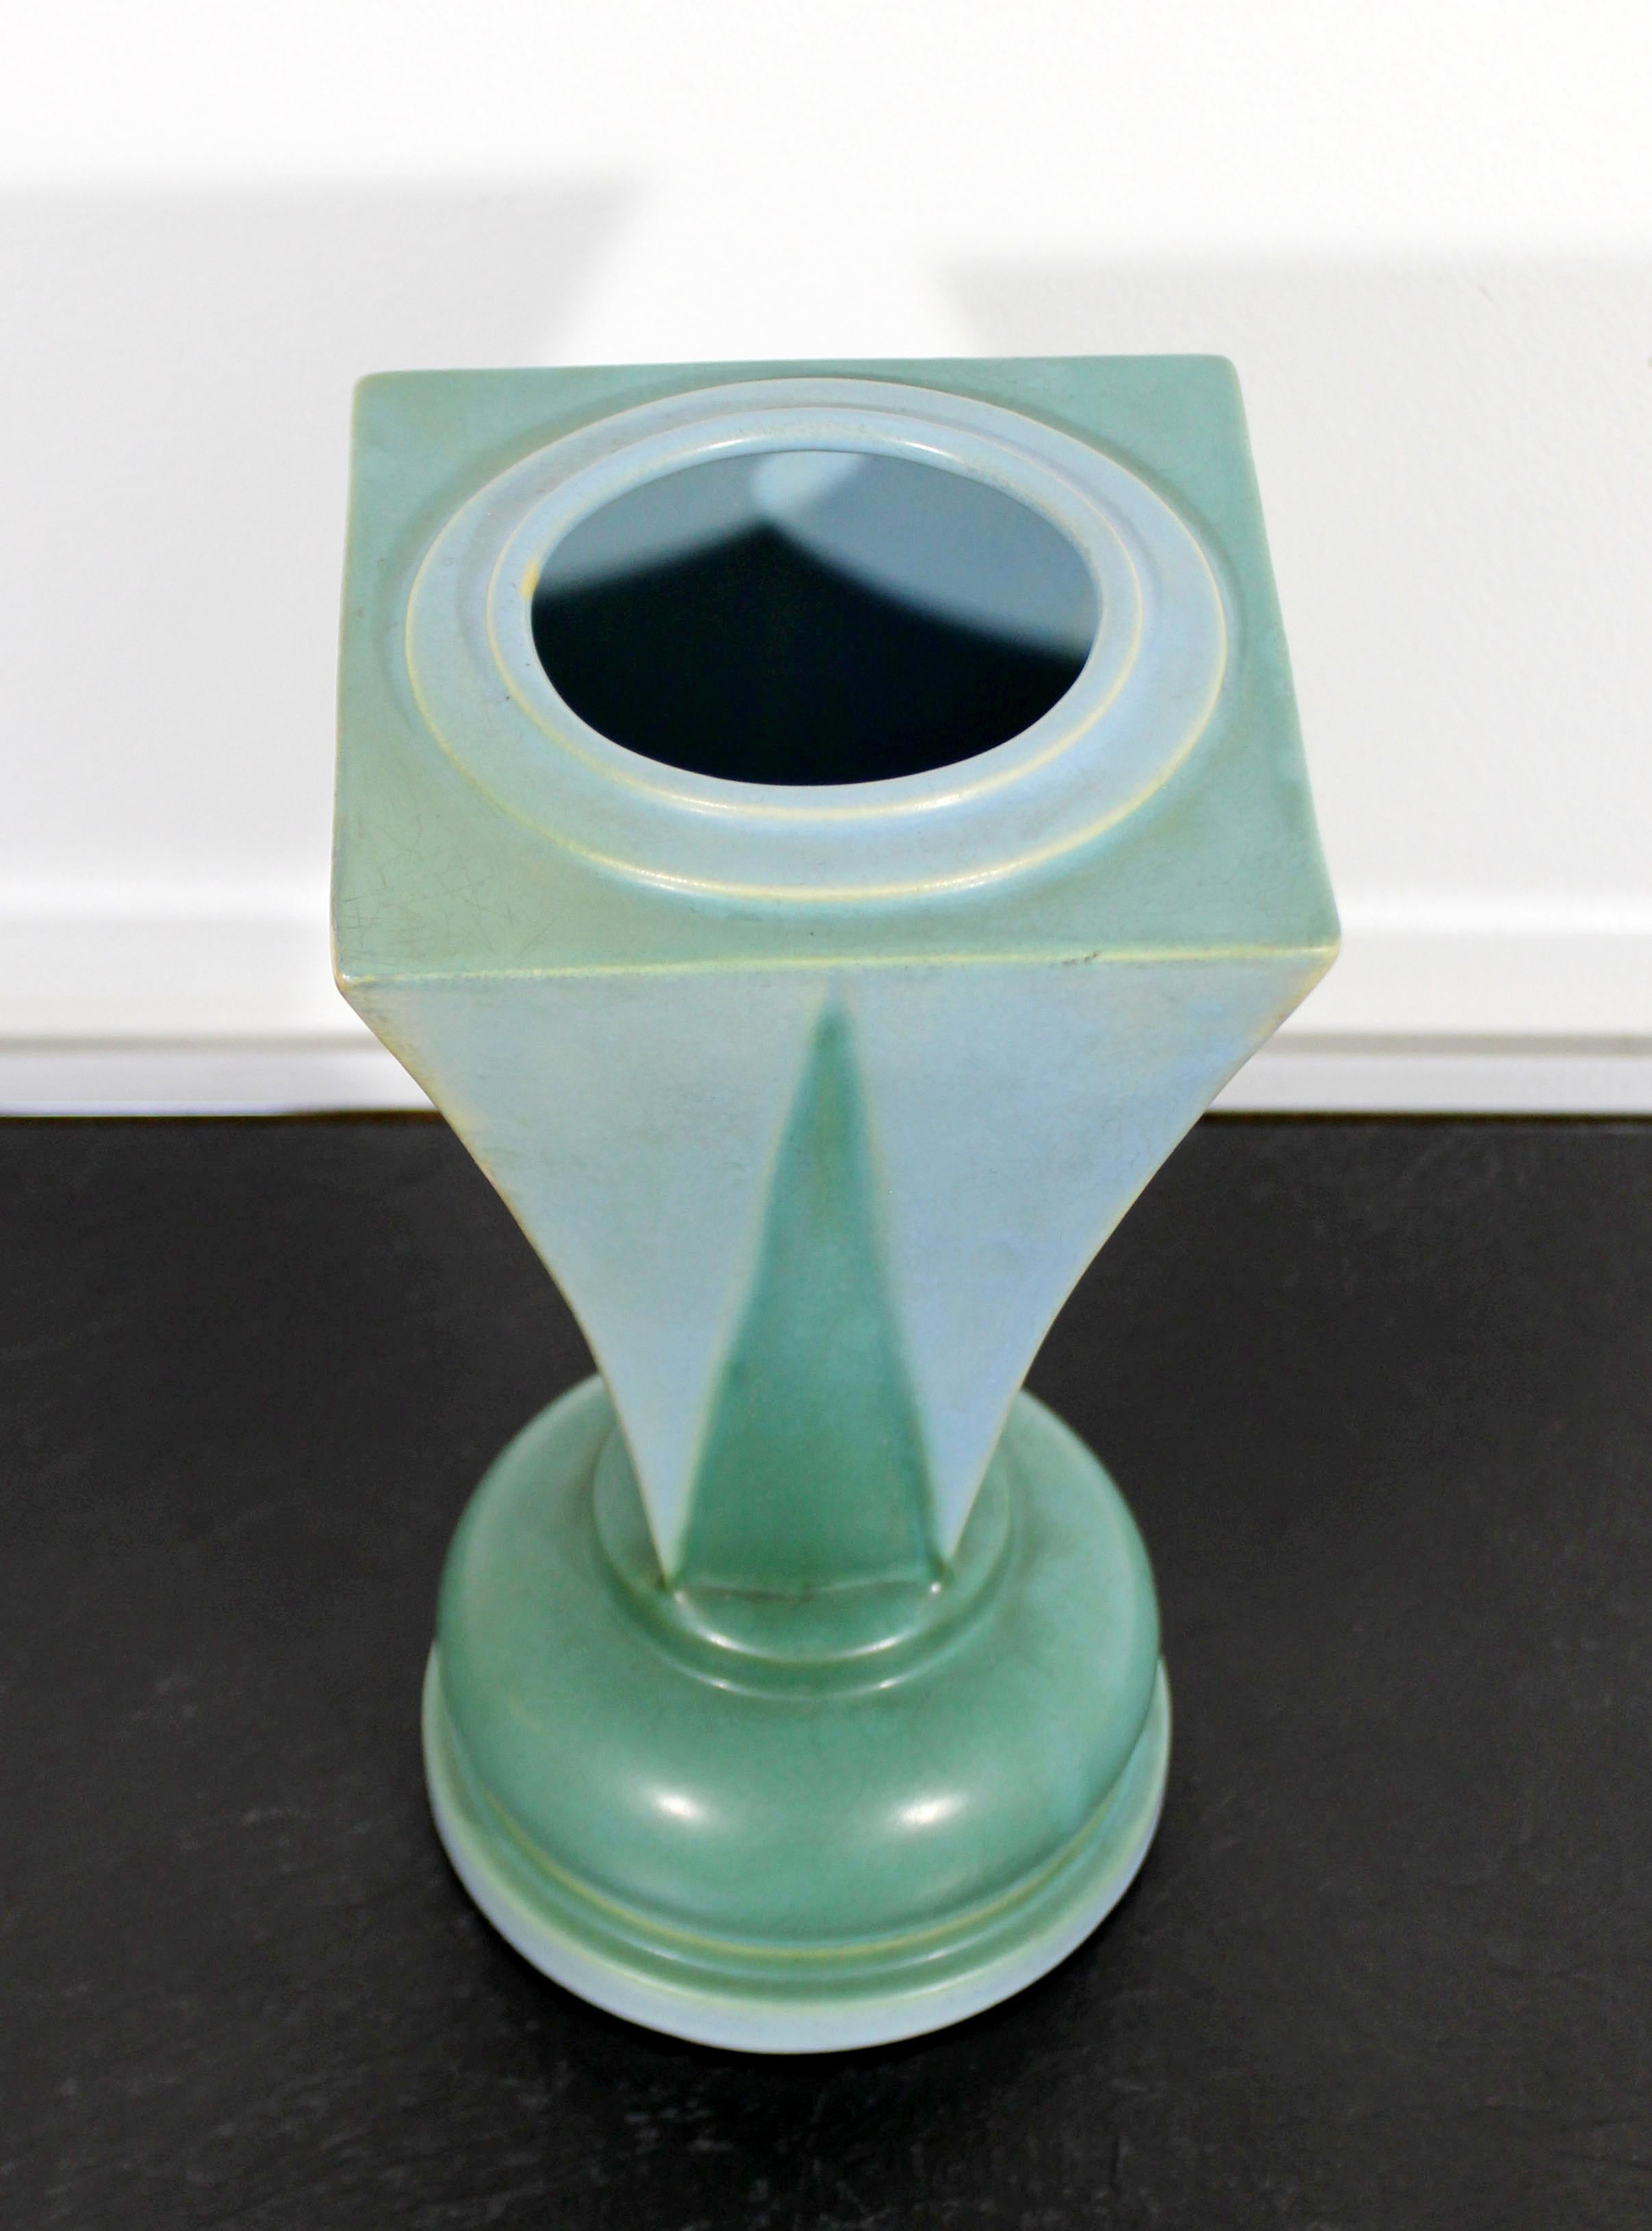 For your consideration is an incredible, ceramic, shooting star shaped art vase or vessel, made by Roseville Futura, circa 1930s. In excellent condition. The dimensions are 5